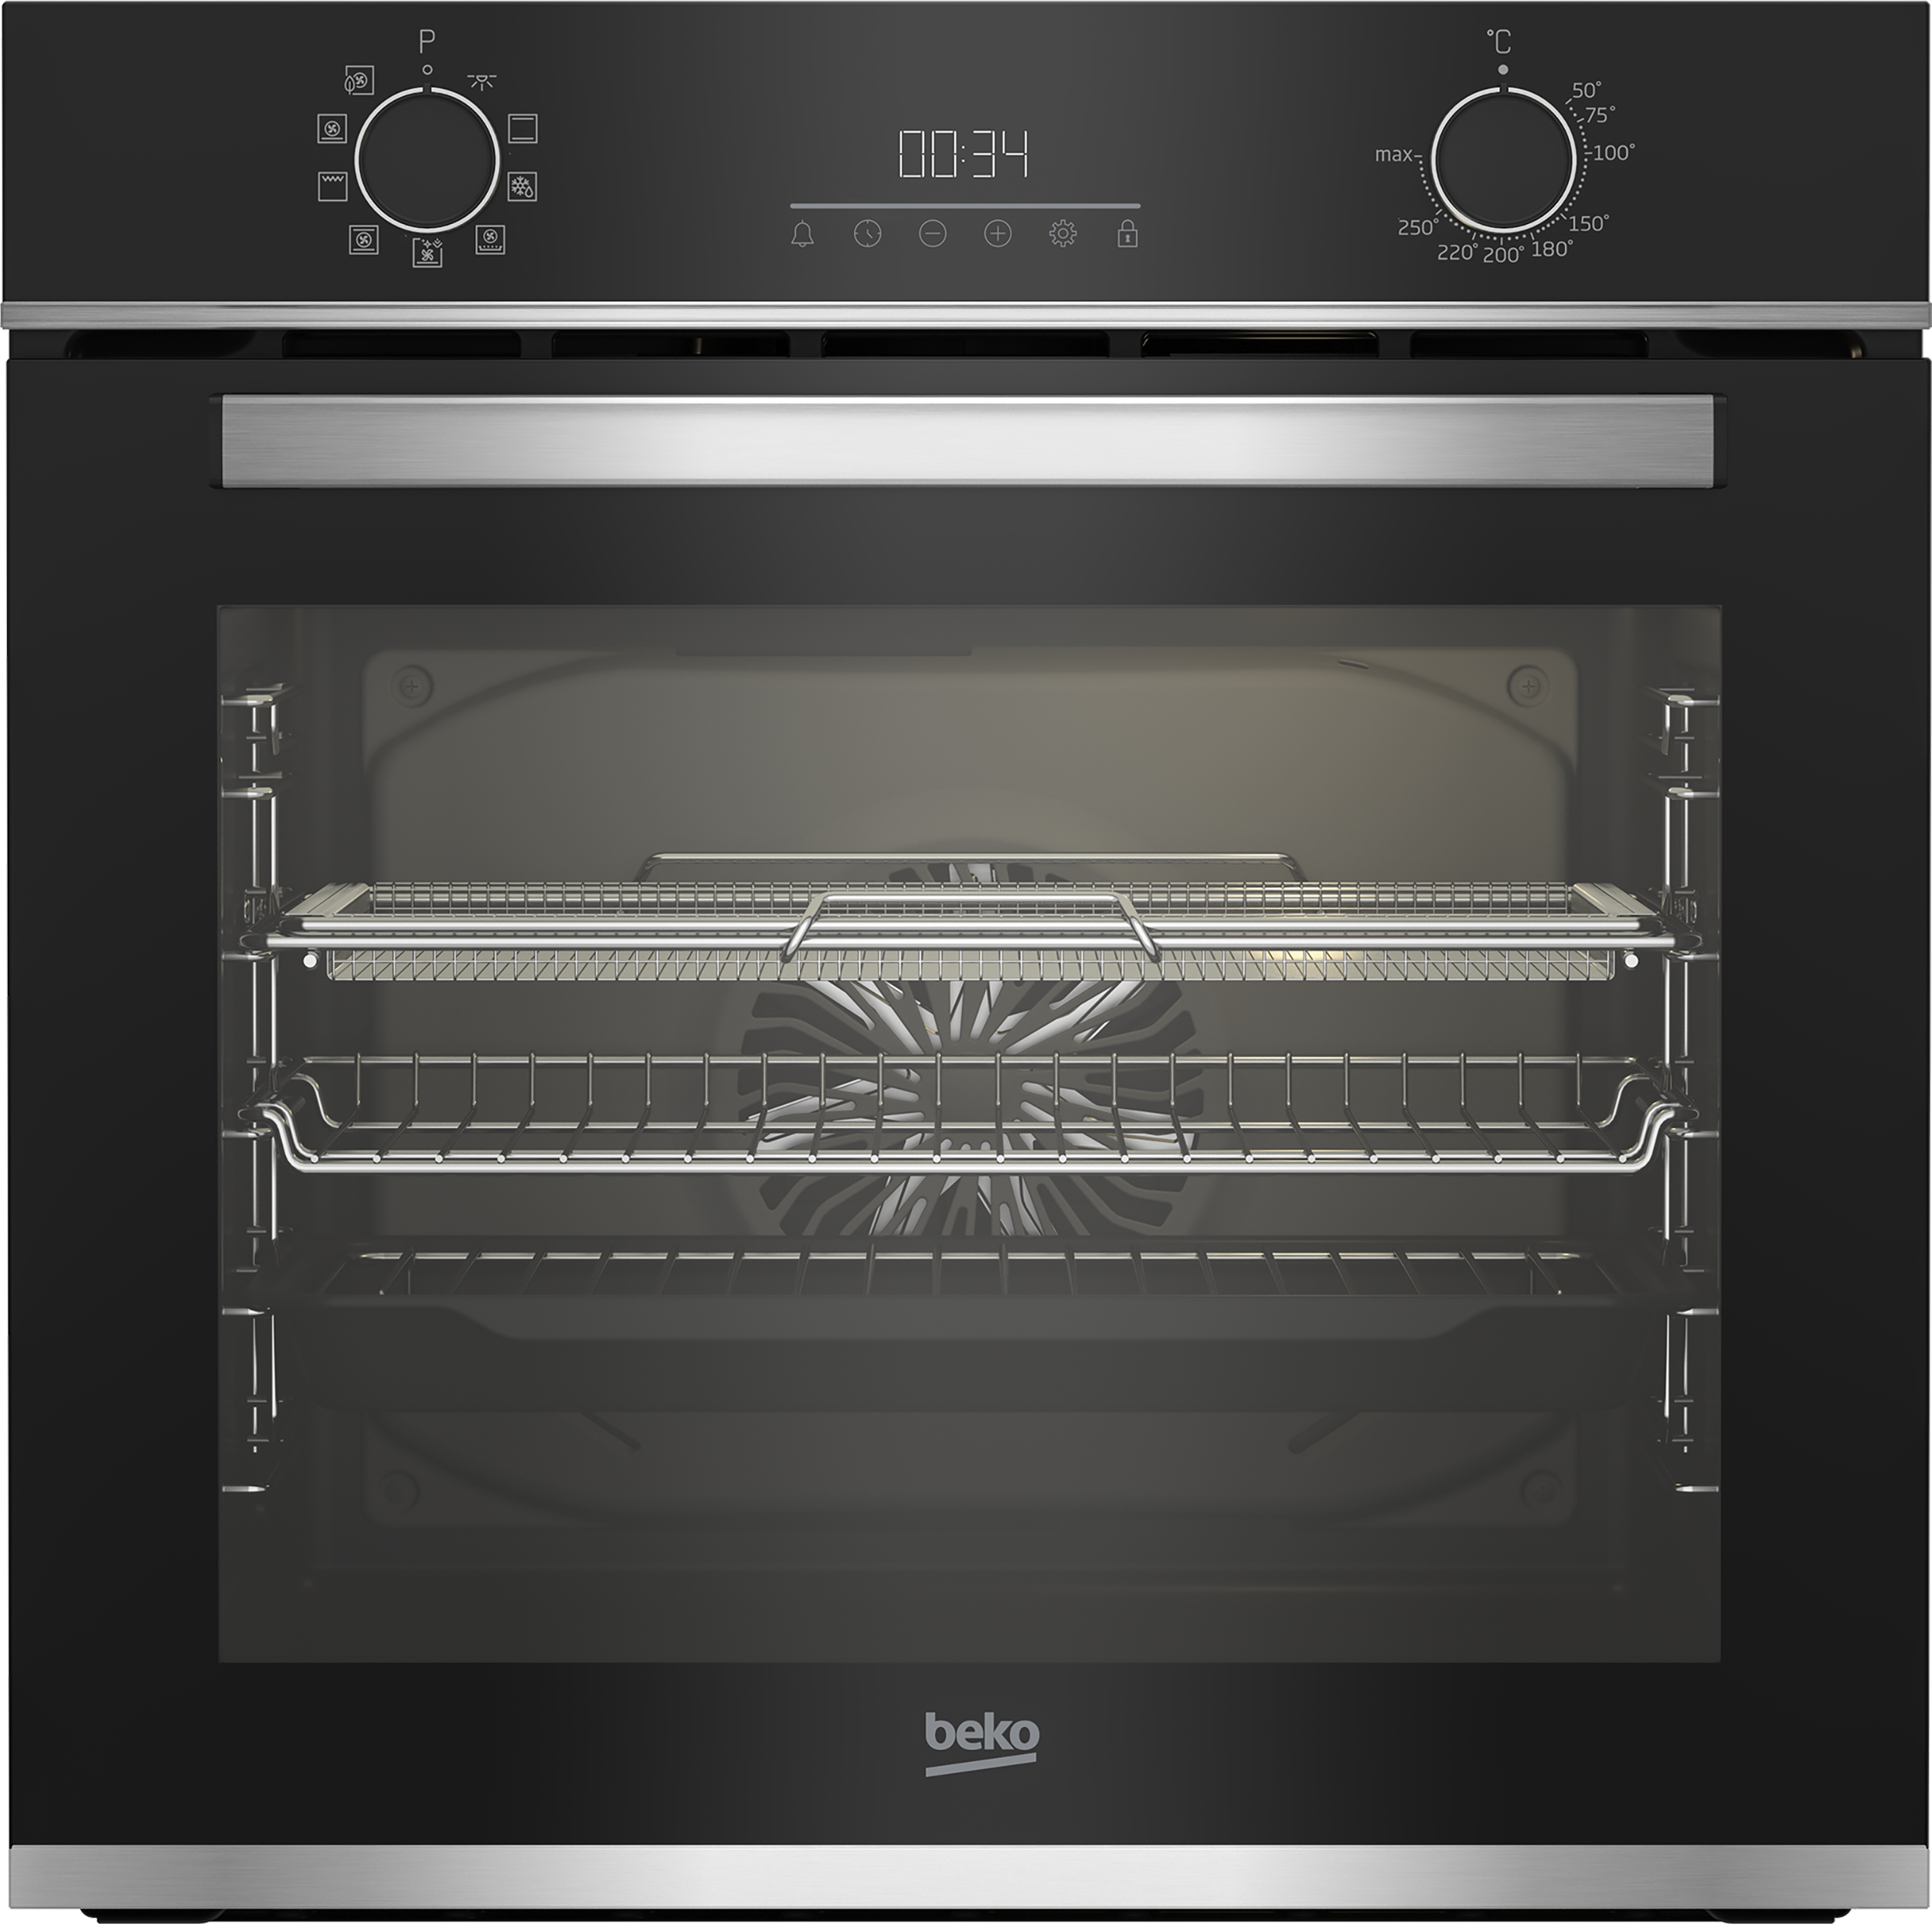 Beko AeroPerfect CIMYA91B Built in Electric Oven with AirFry Technology